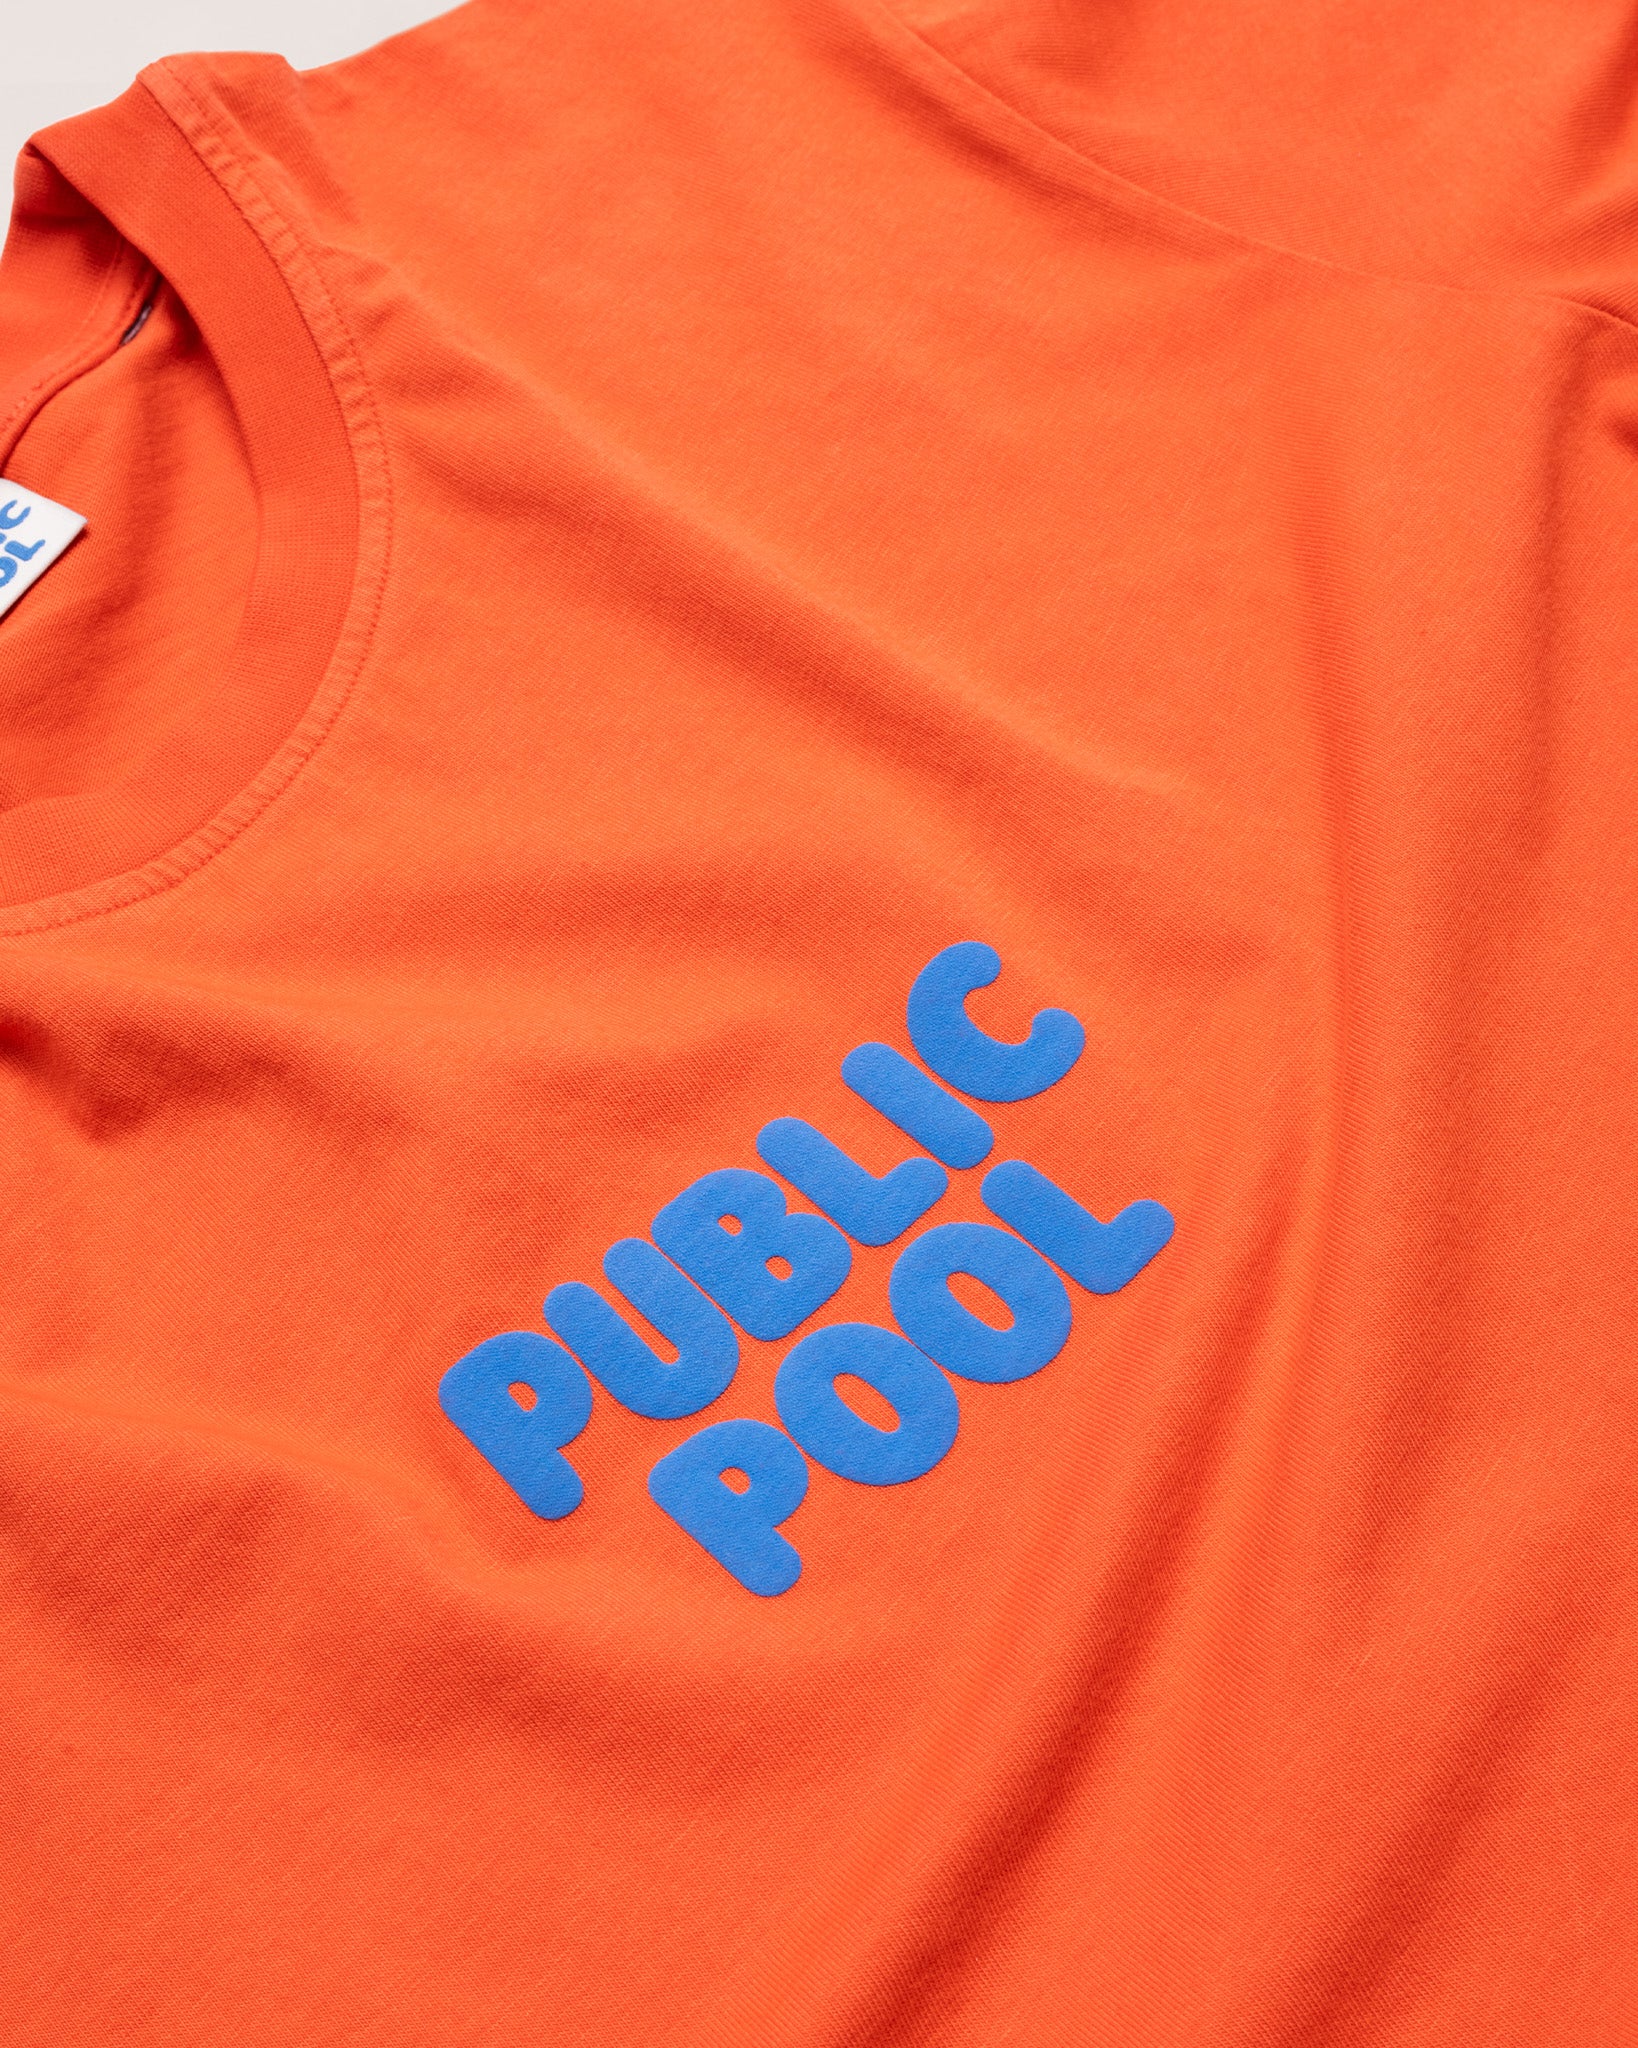 A zoomed in image of the blue Public Pool logo on an orange shirt. 